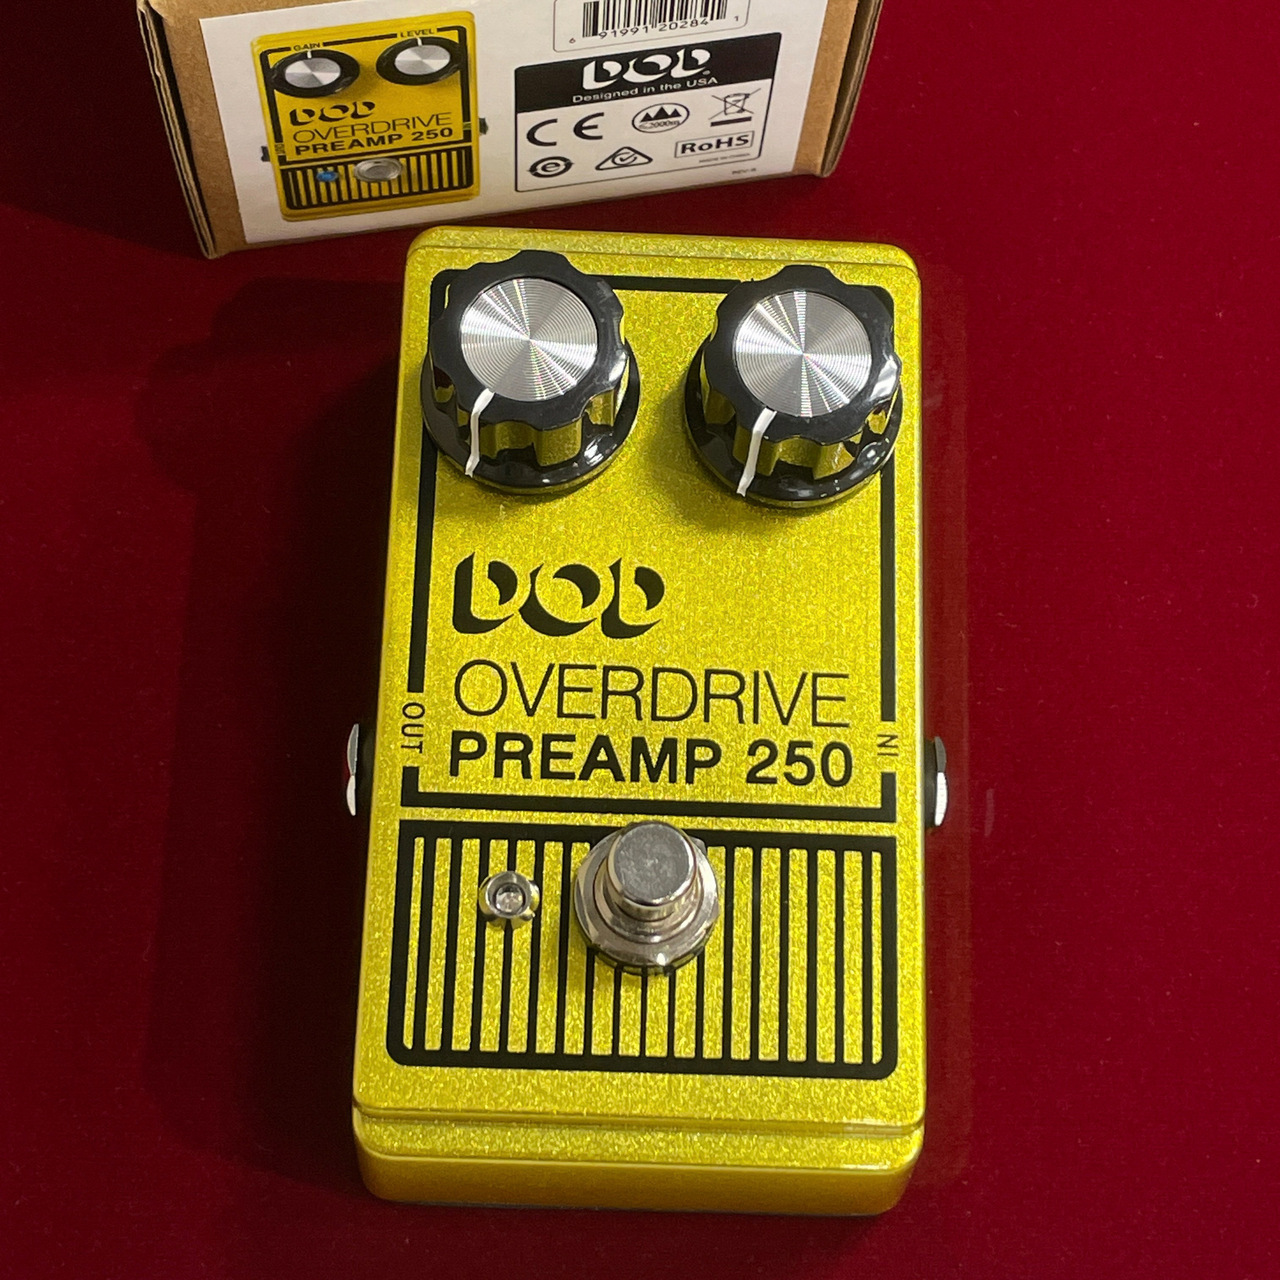 DOD Overdrive / Preamp 250